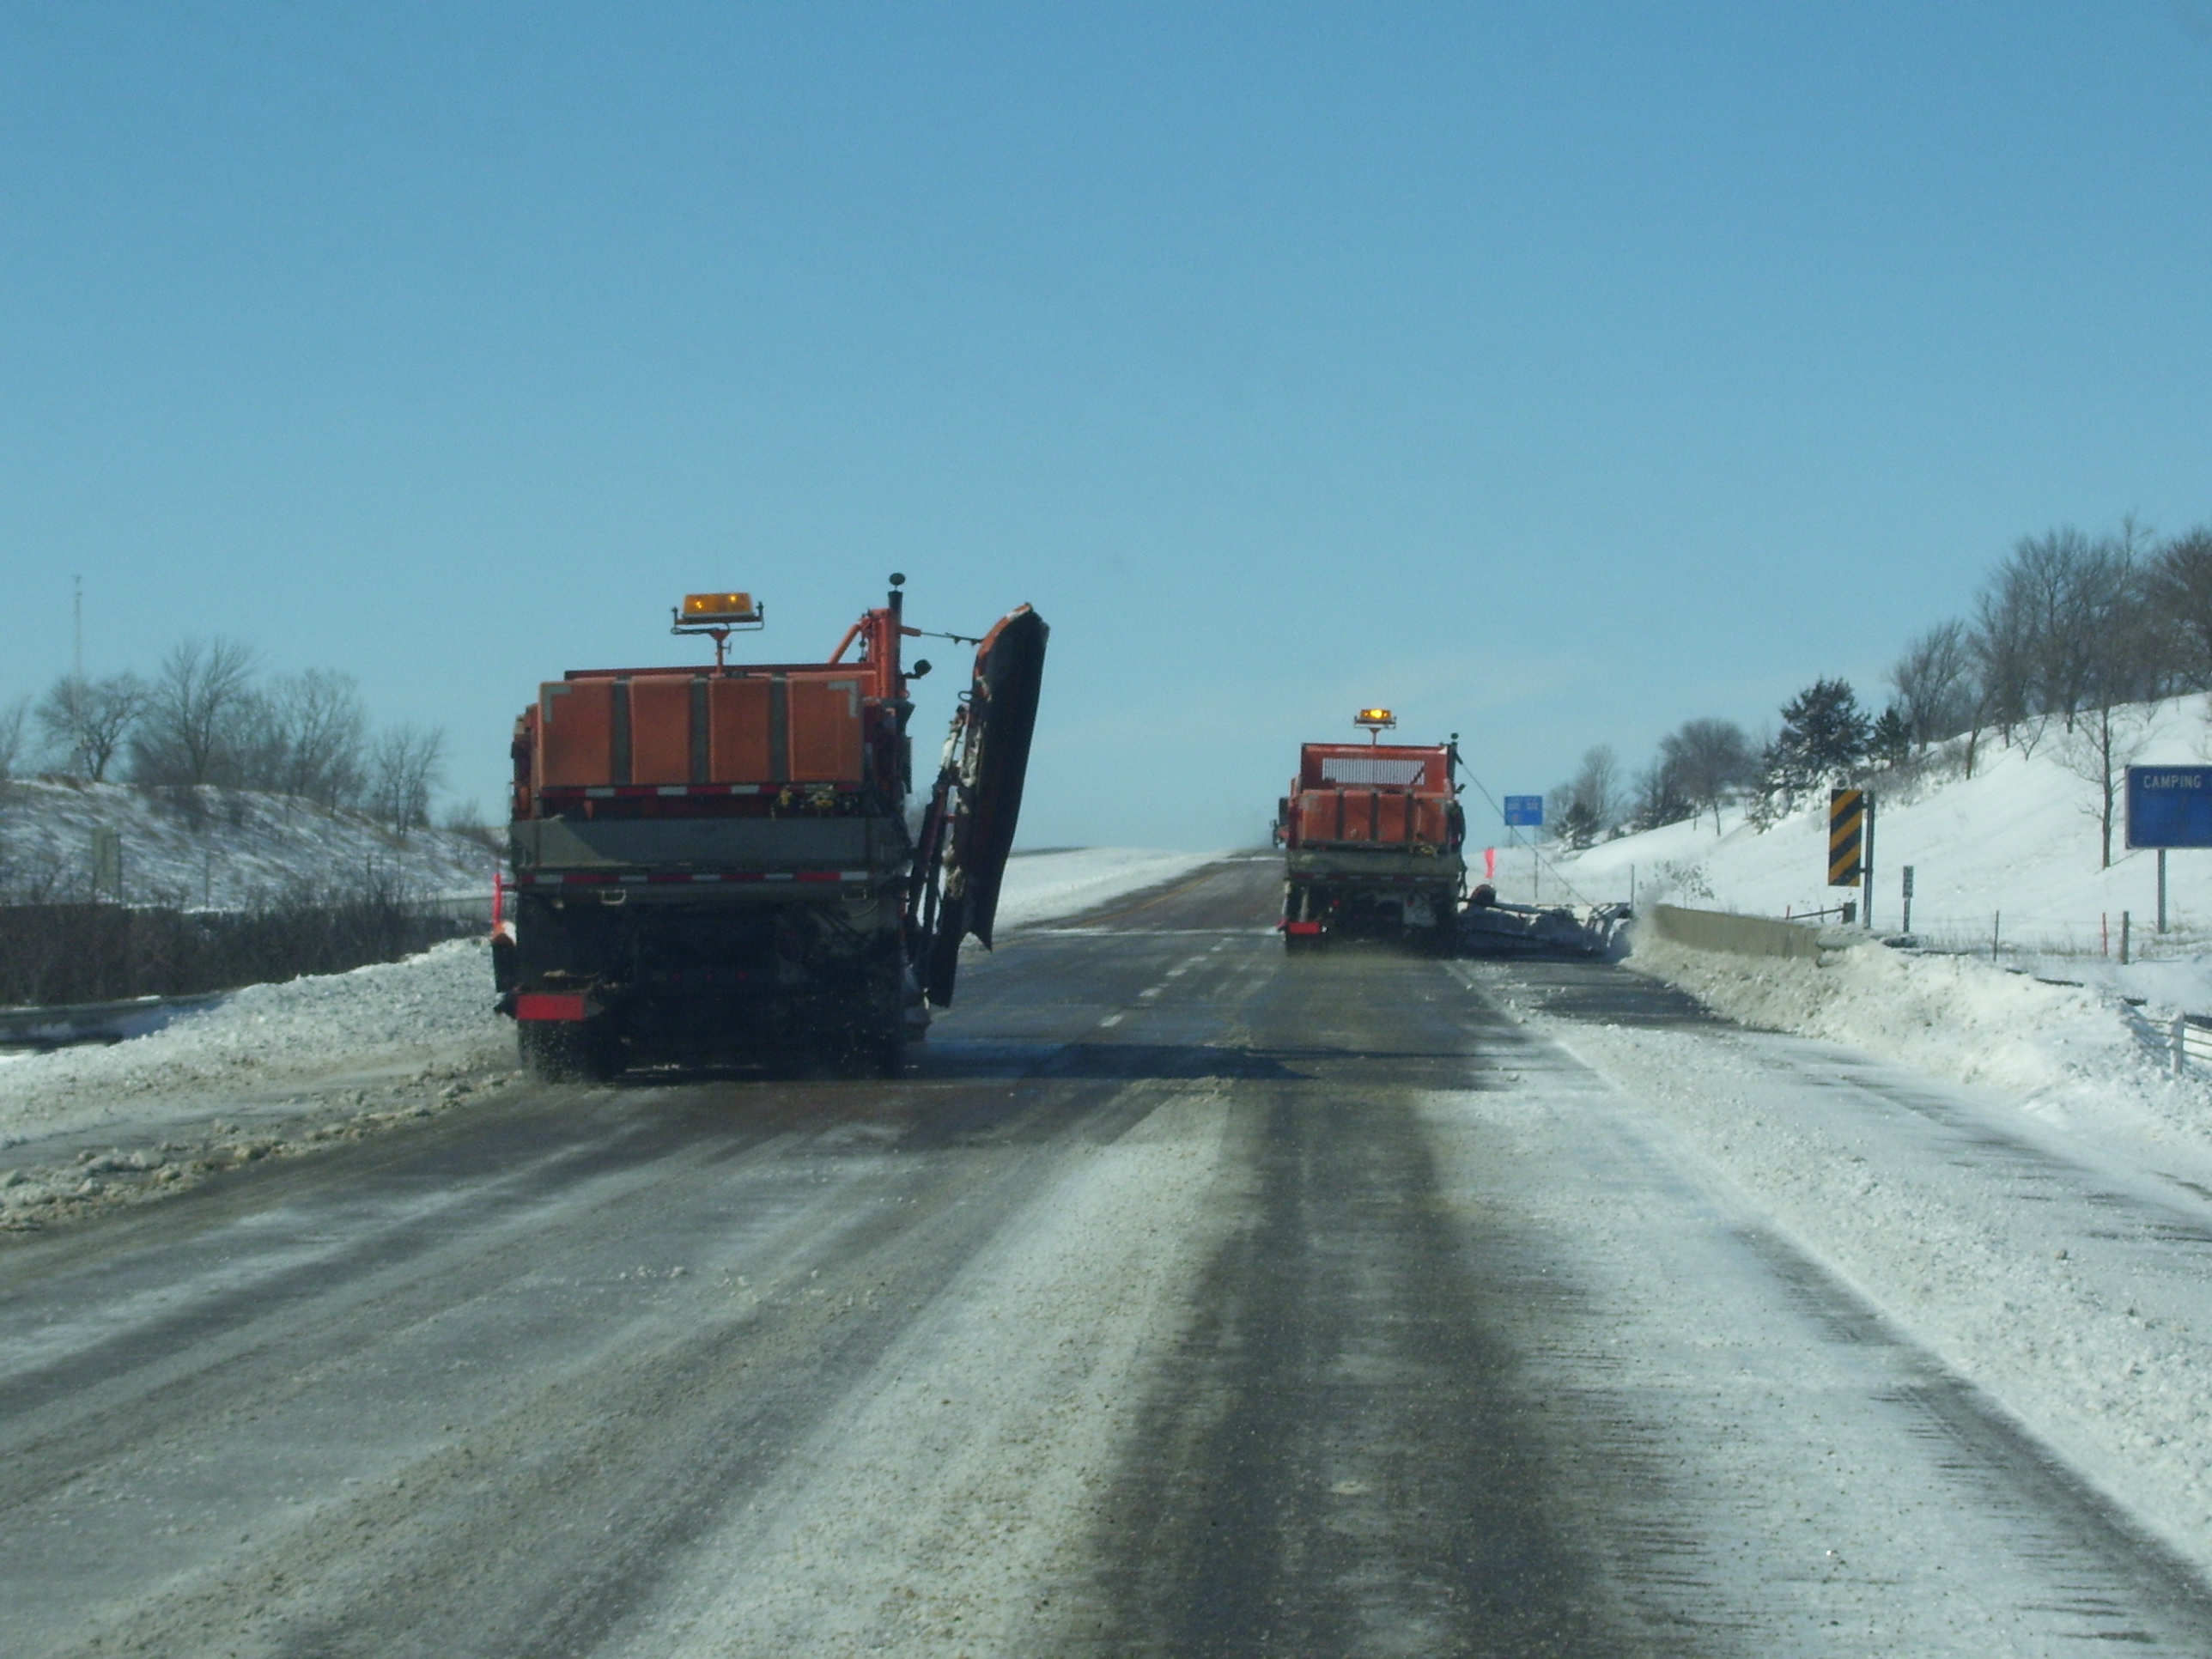 Snowplows clearing a street after a storm